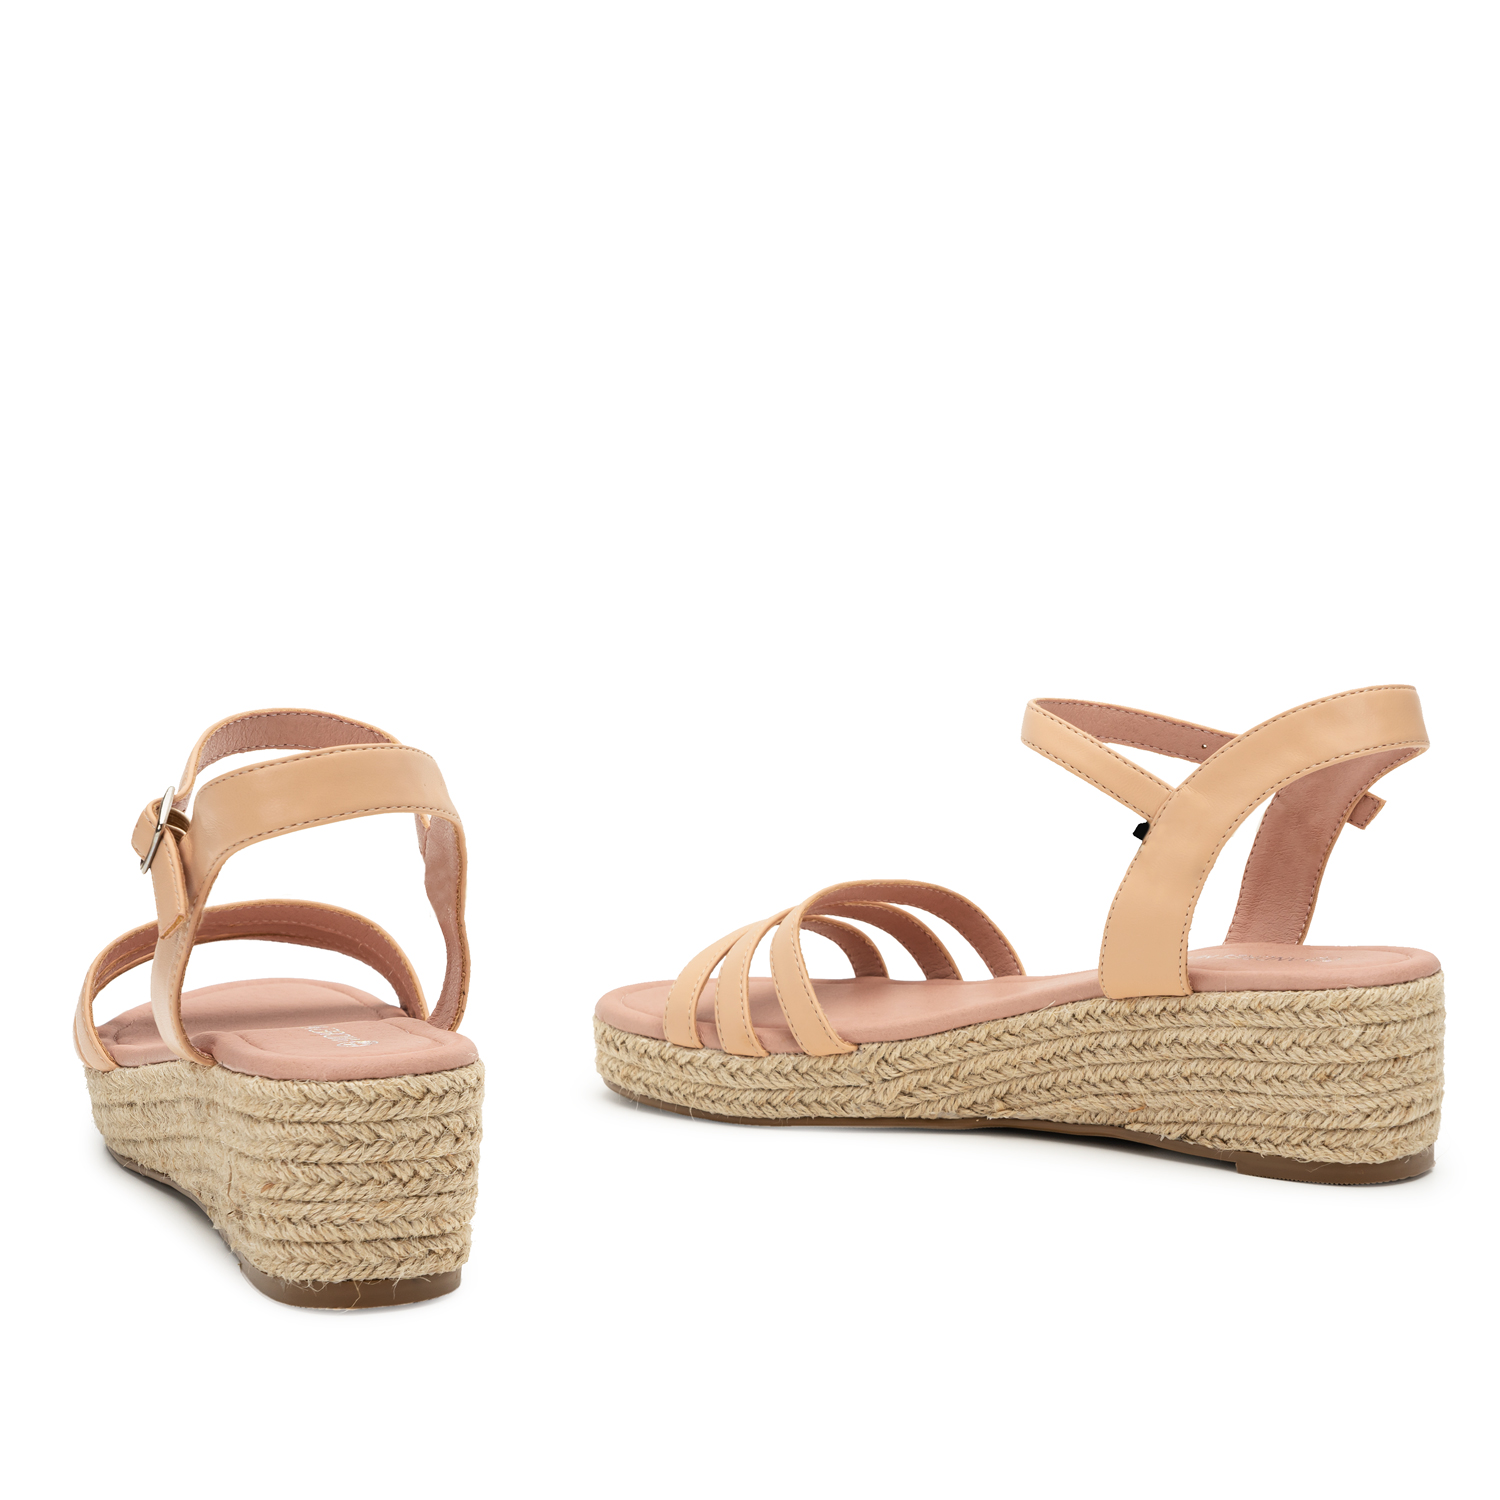 Nude Faux Leather Sandals with Jute Wedge 